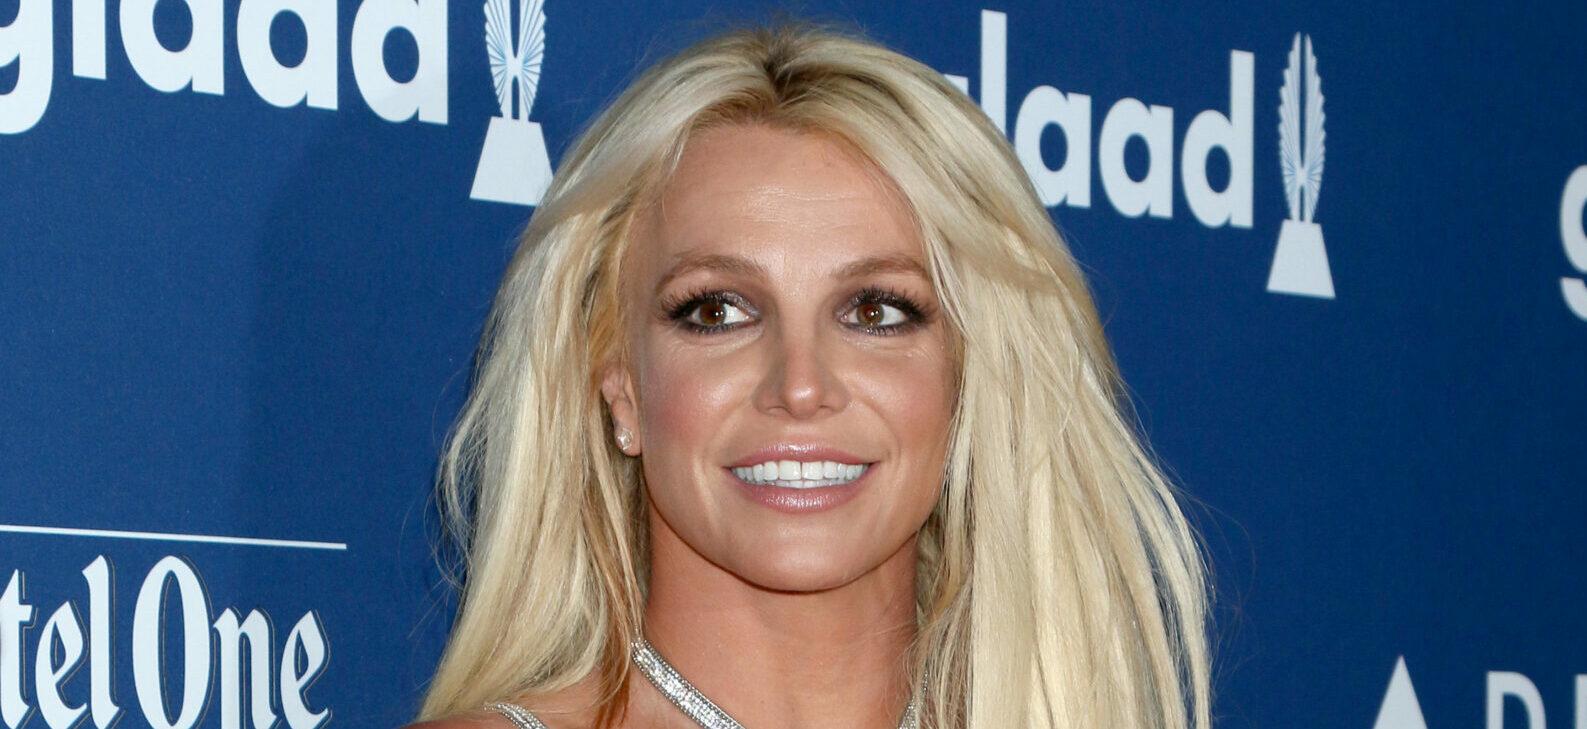 Britney Spears Bares It All On Instagram: ‘Just Me Breathing’